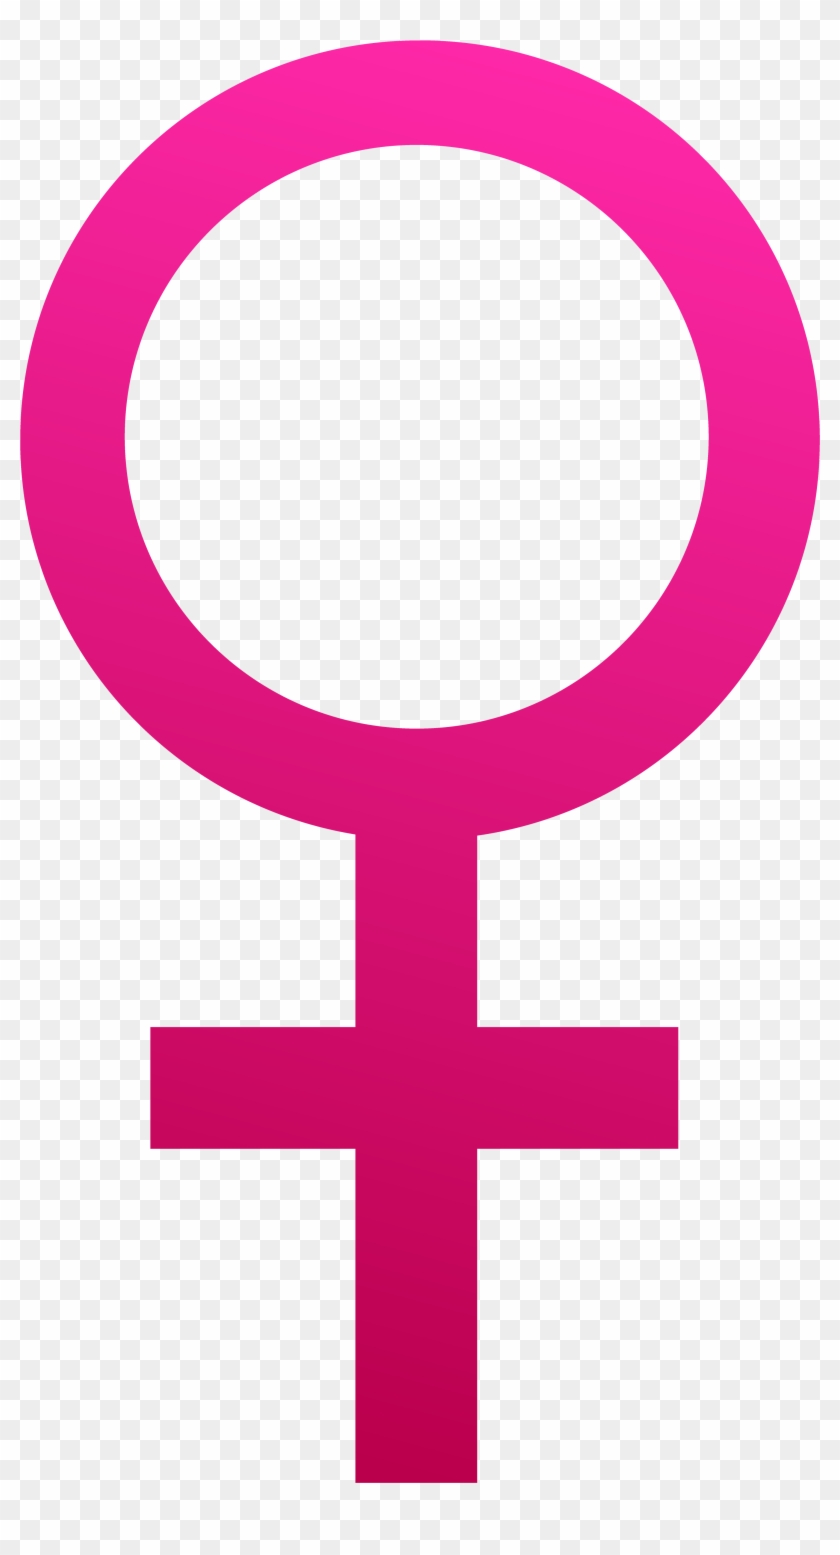 Female Symbol 2 Clip Art At Clker Woman Symbol - More Women Or Men In The World #382053